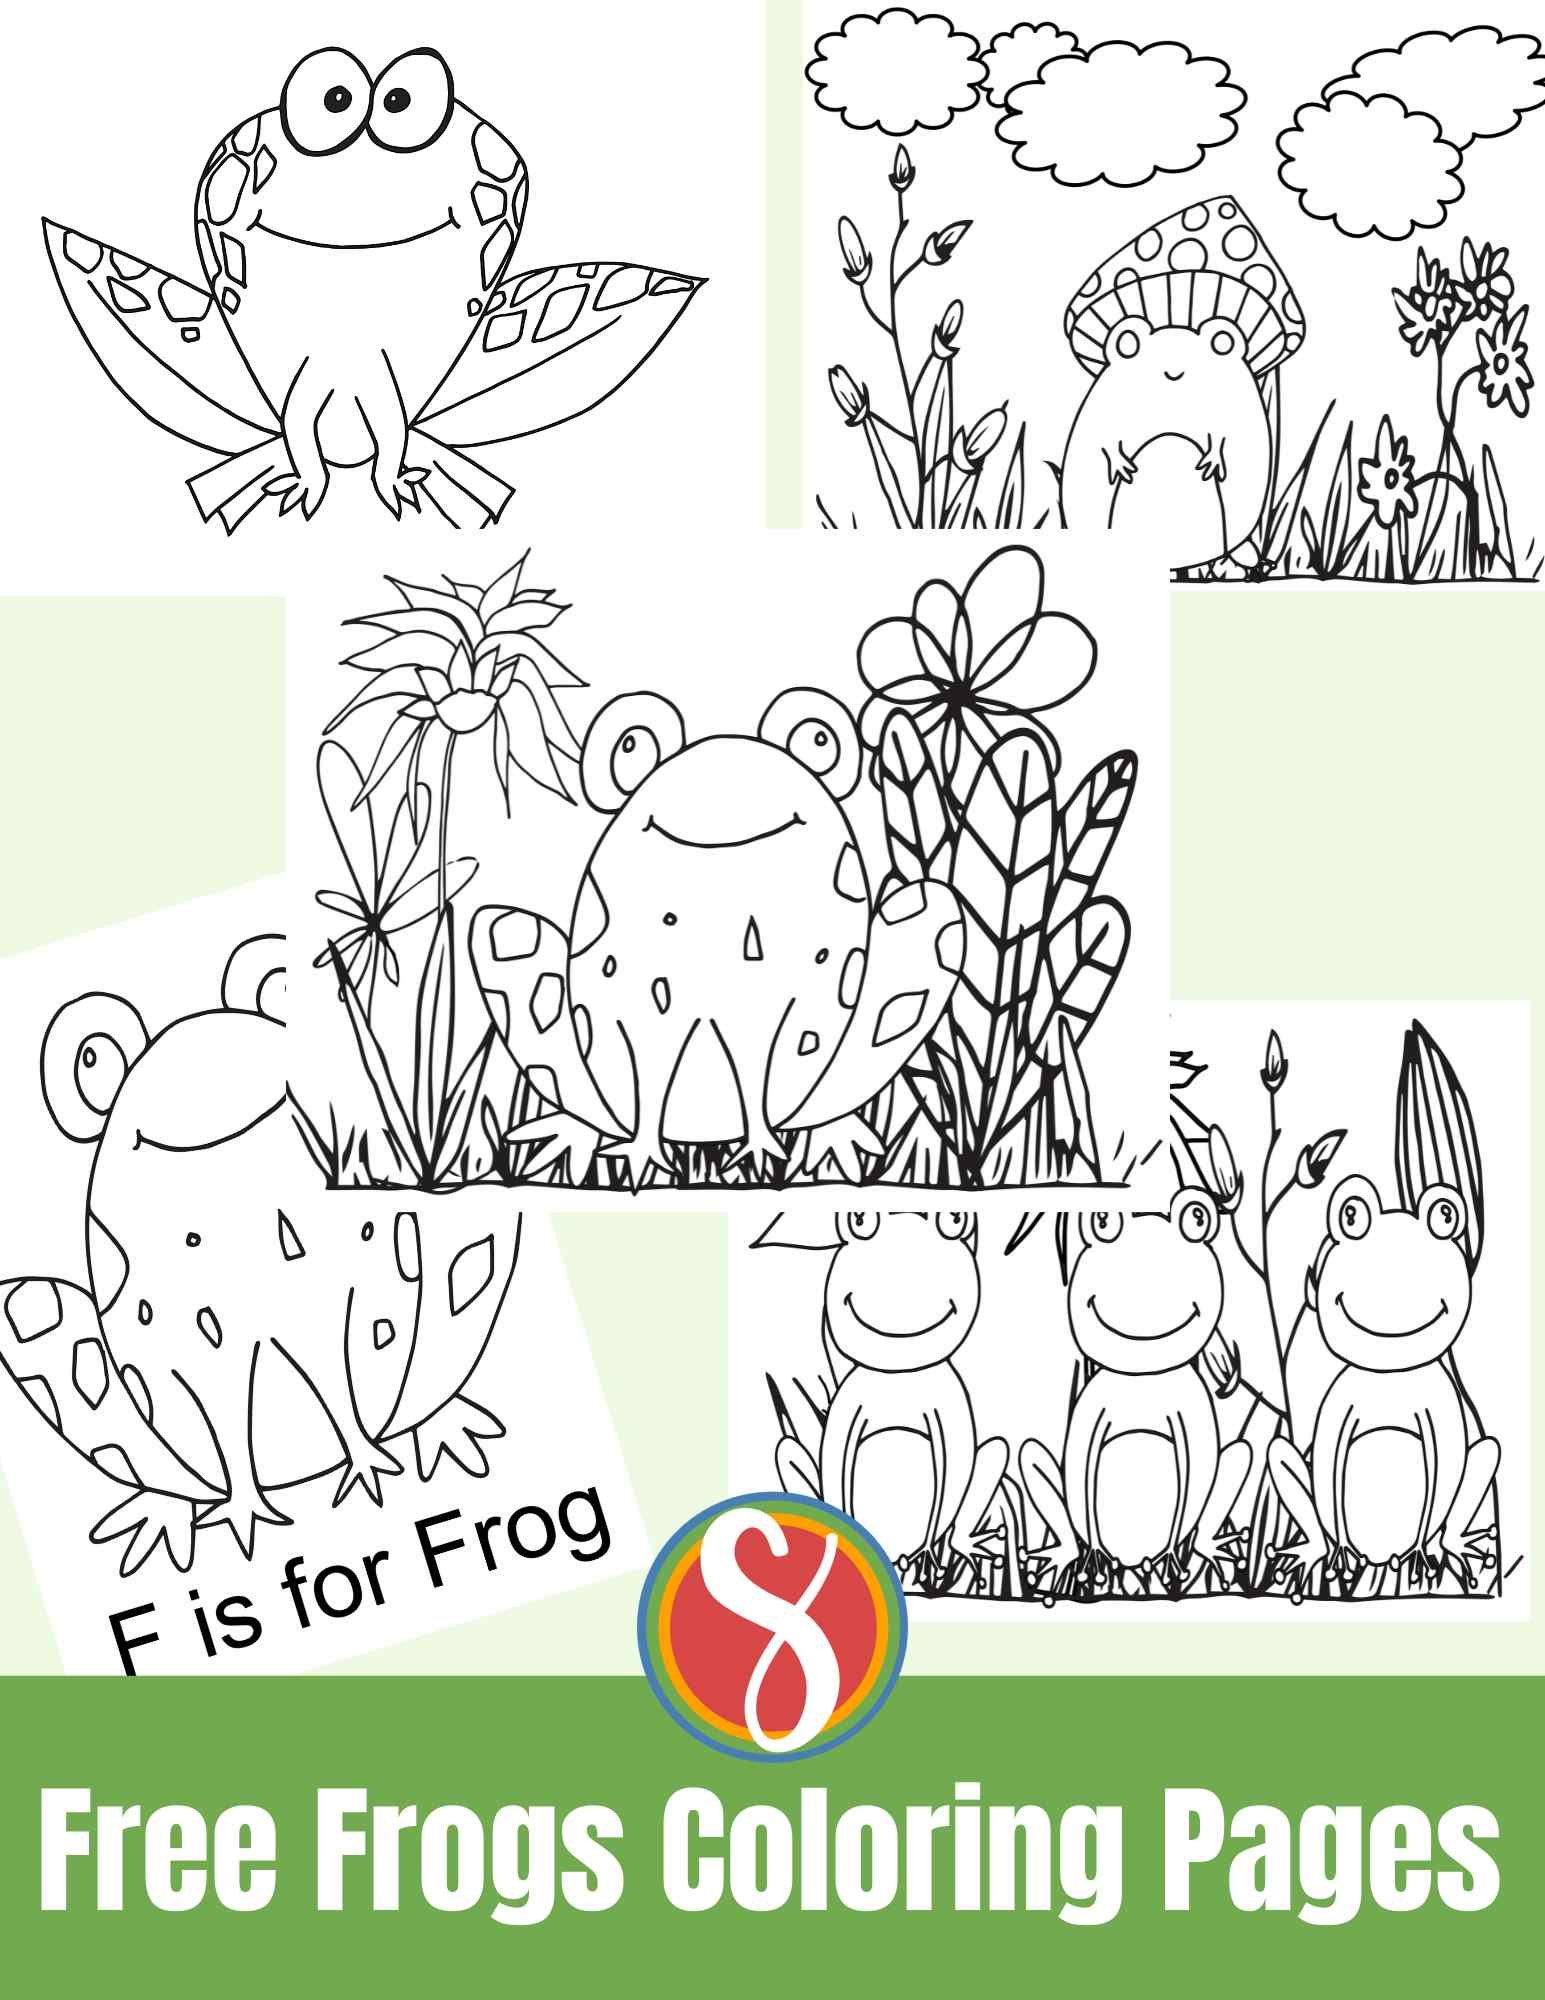 a collage of frog coloring pages, simple drawings